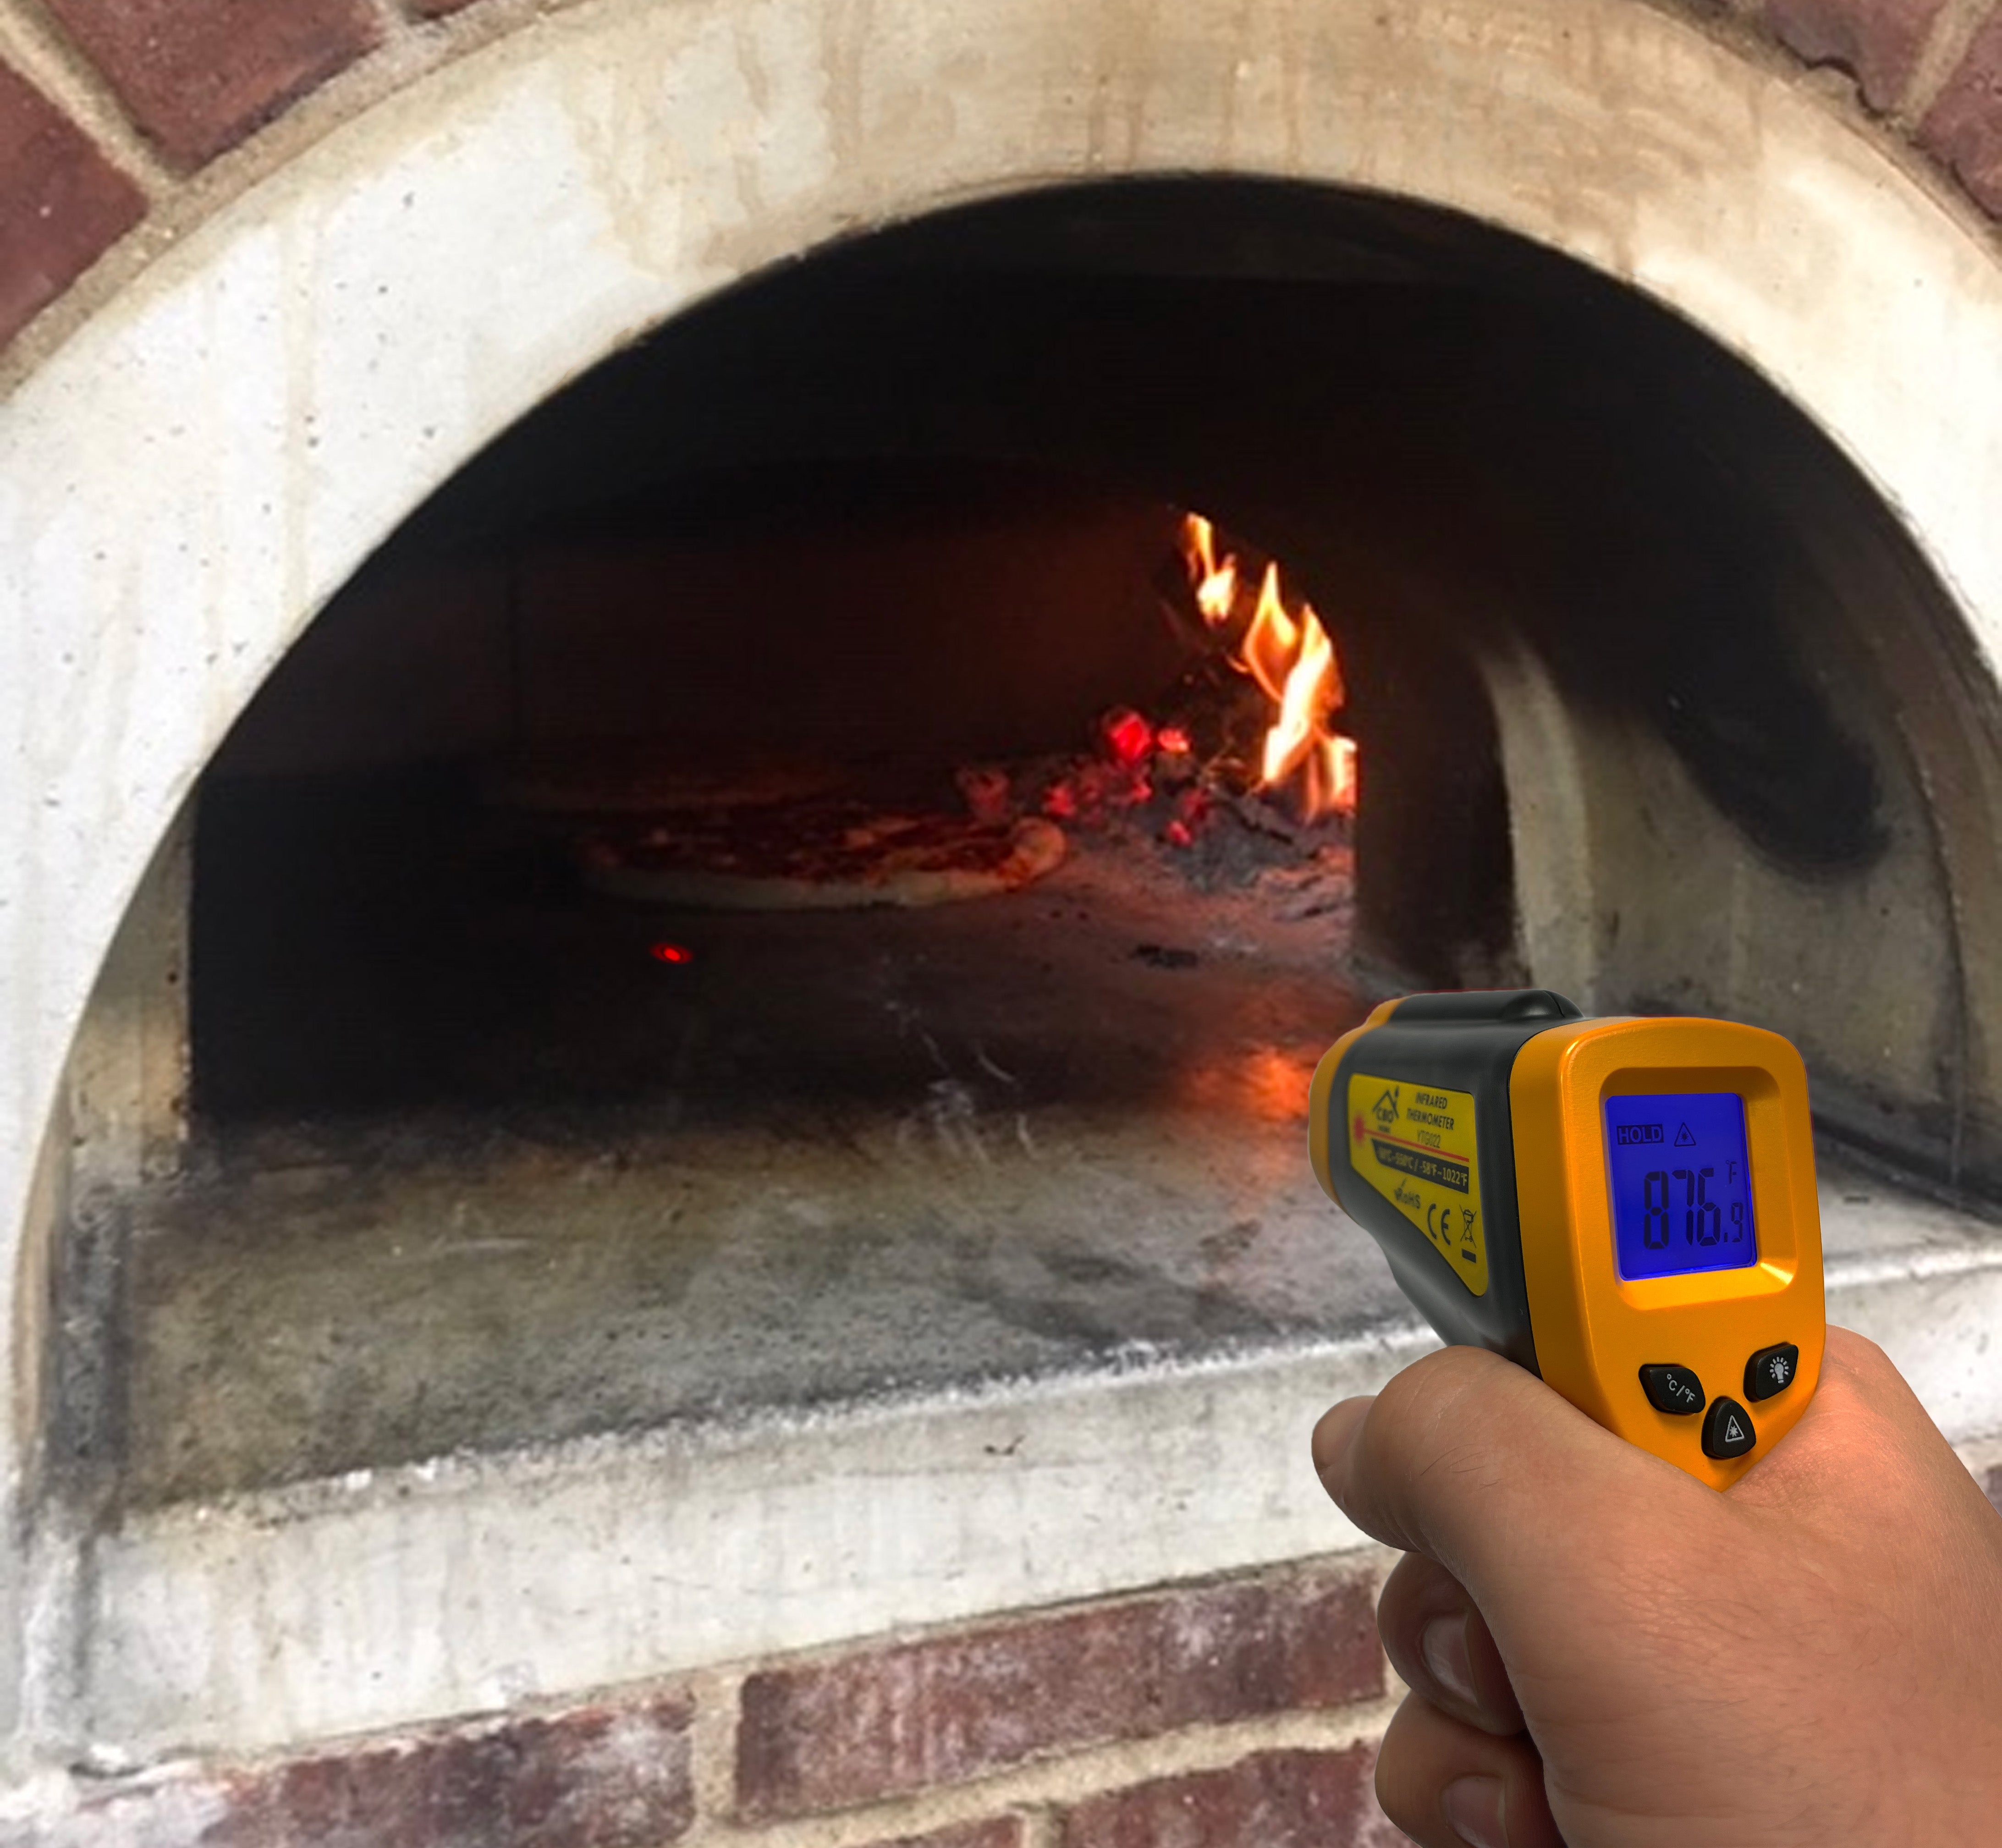 ERICHILL ROOK600SP infrared thermometer gun cooking industrial LCD displays